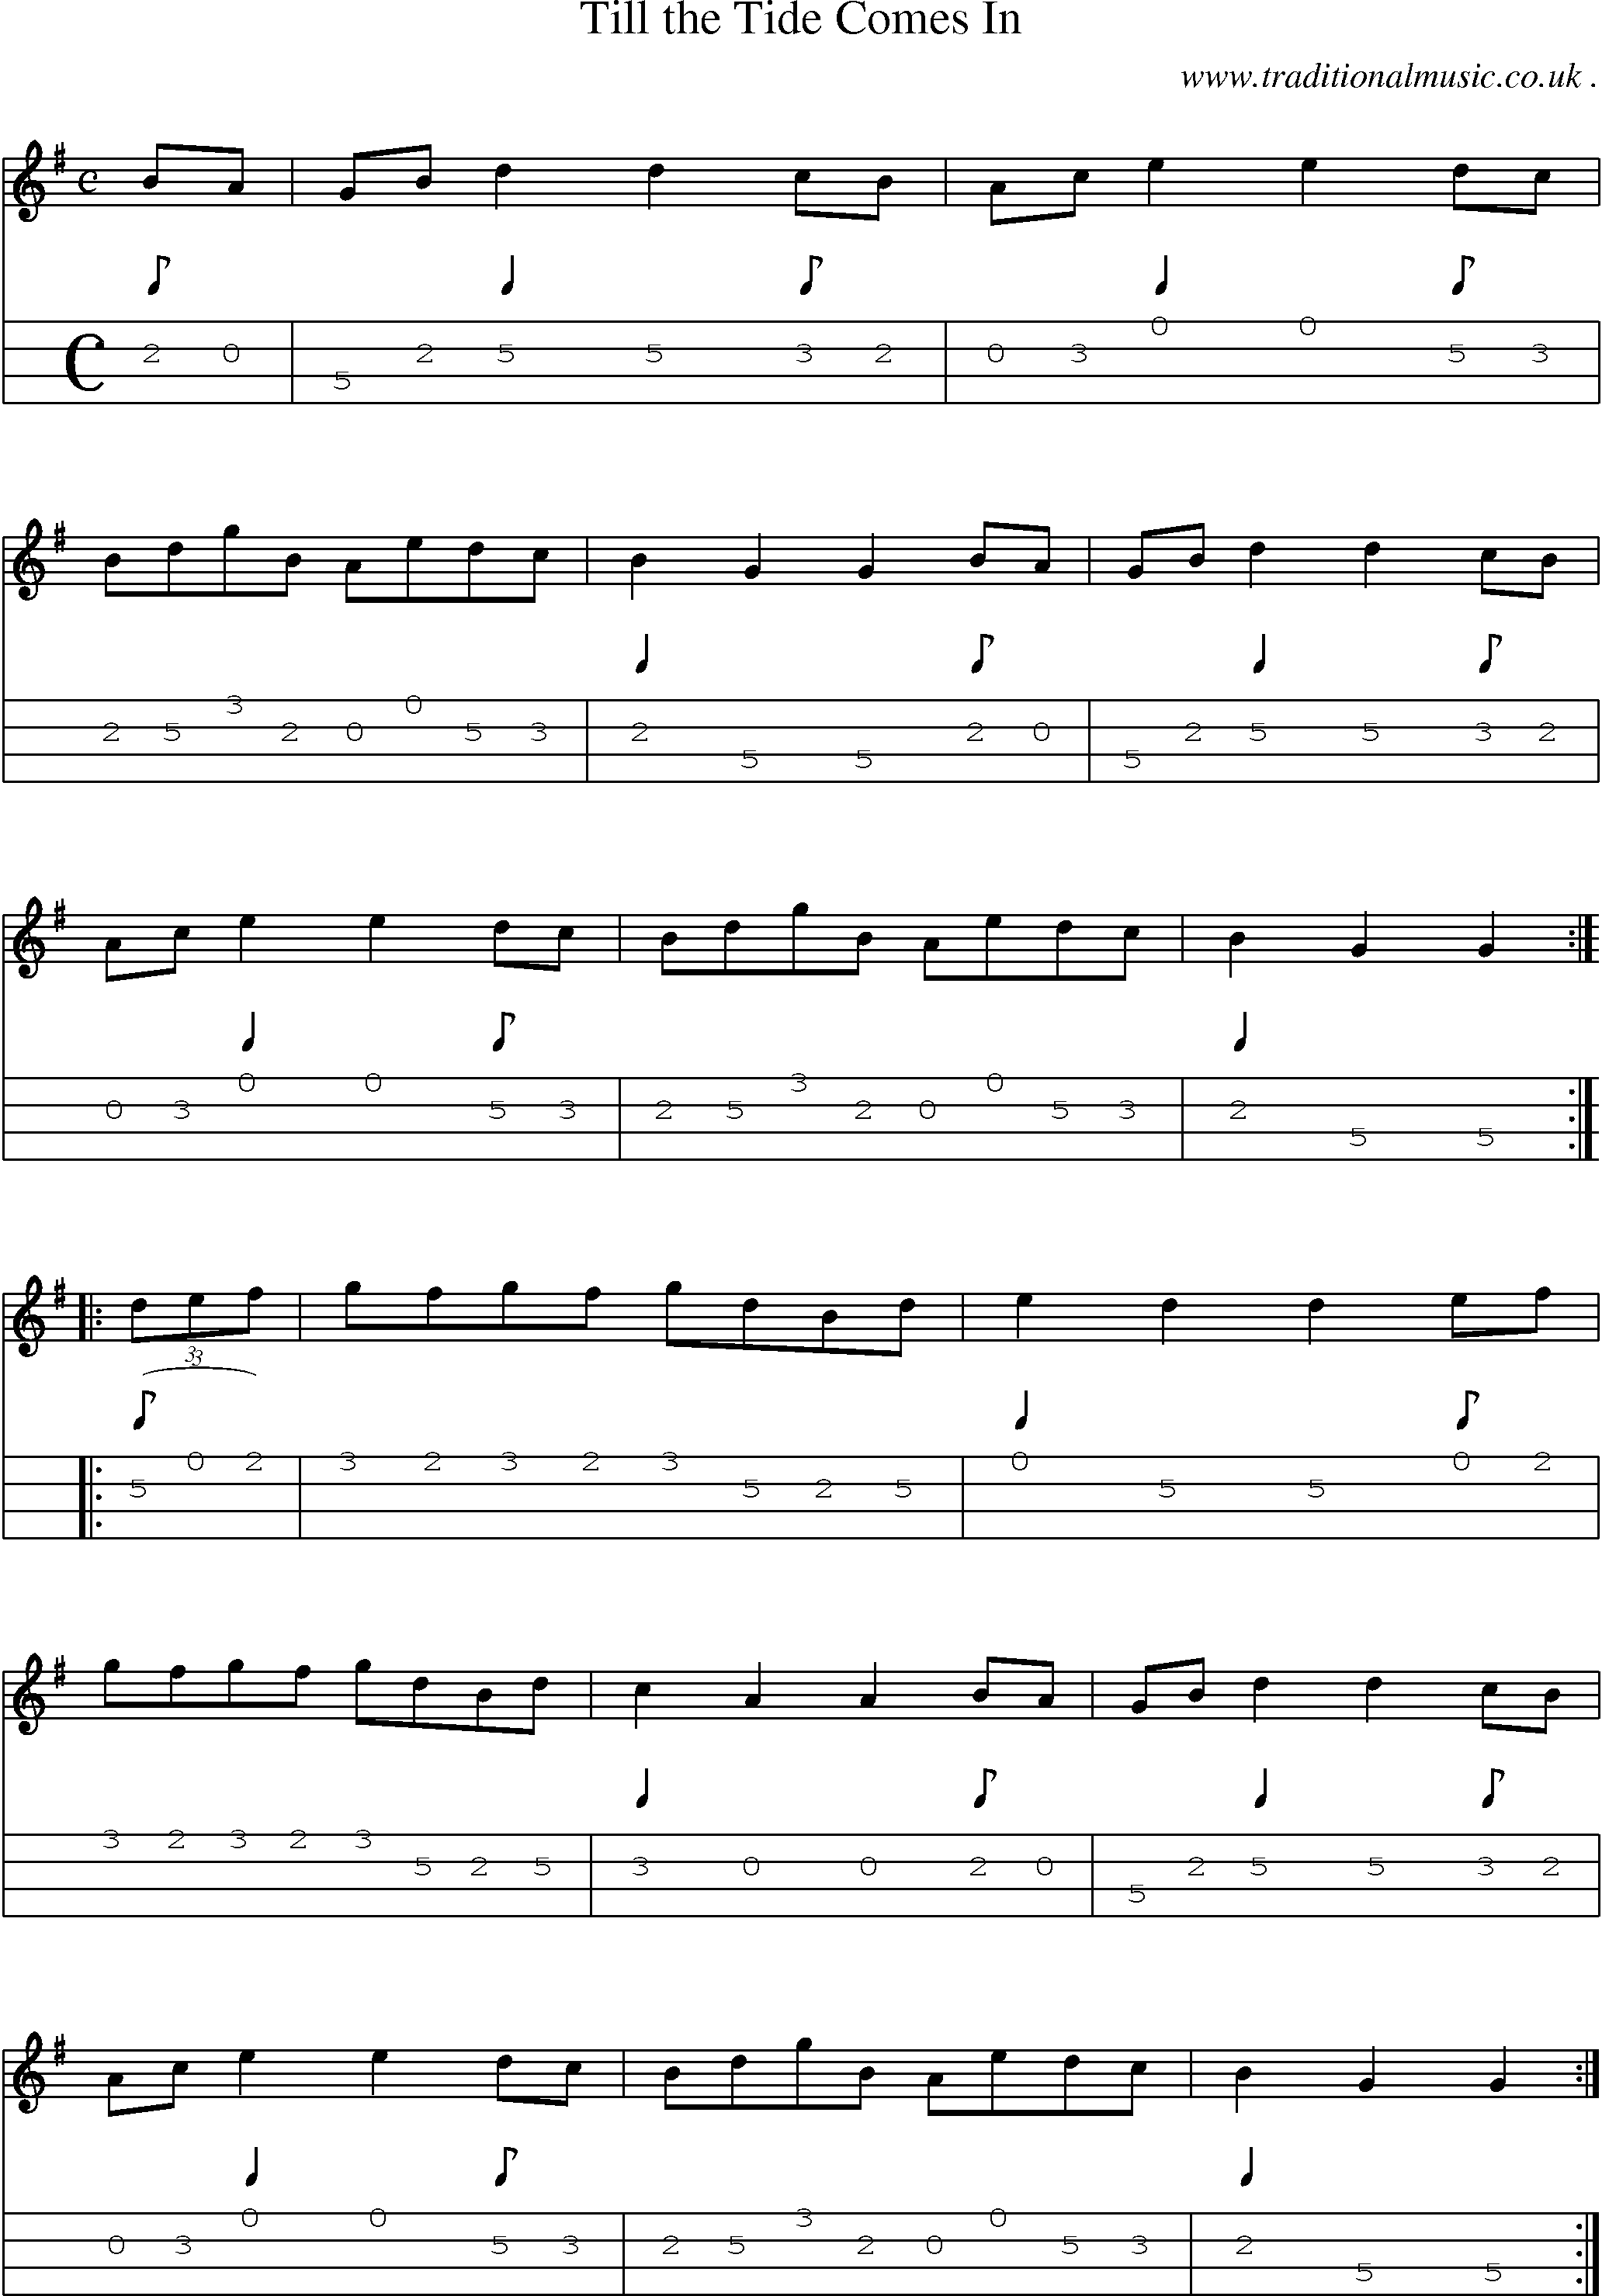 Sheet-Music and Mandolin Tabs for Till The Tide Comes In